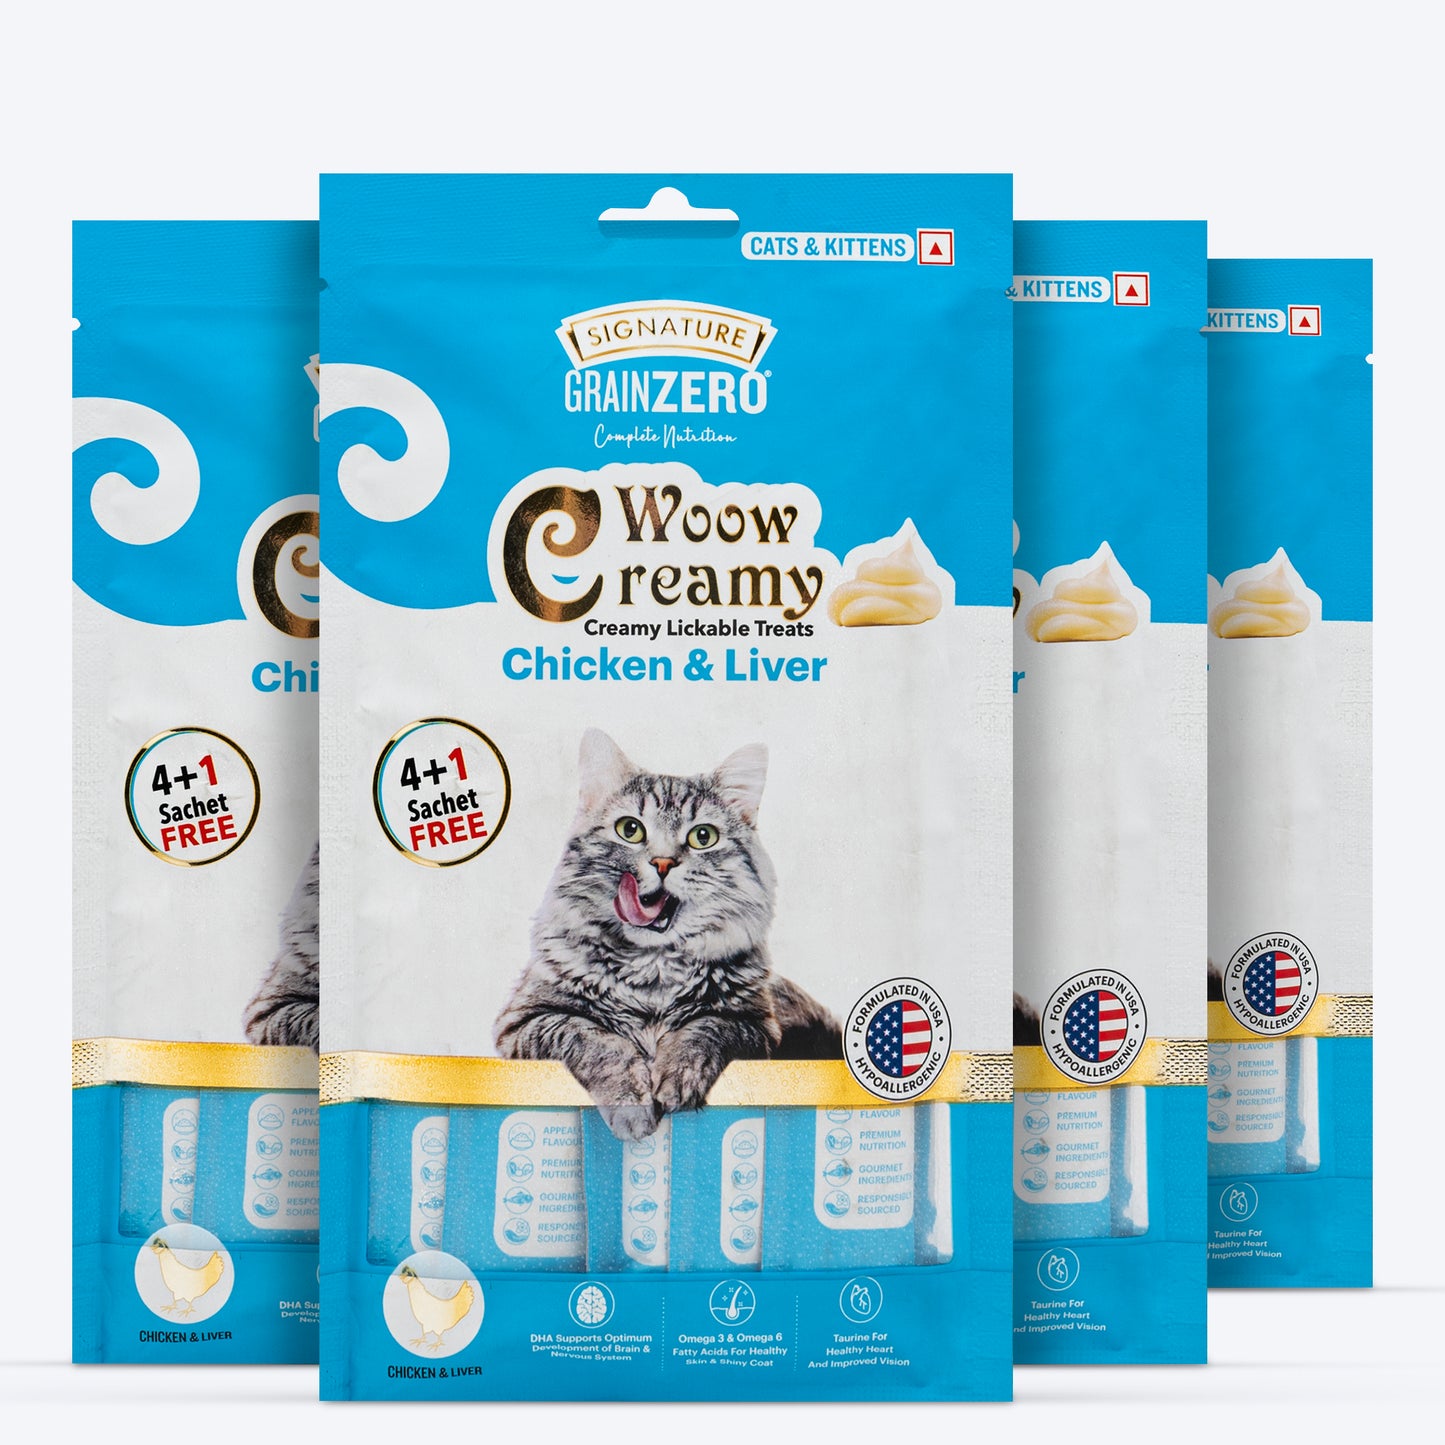 Signature Grain Zero Woow Creamy Chicken & Liver Lickable Treats For Cat & Kitten - 75 g - Heads Up For Tails